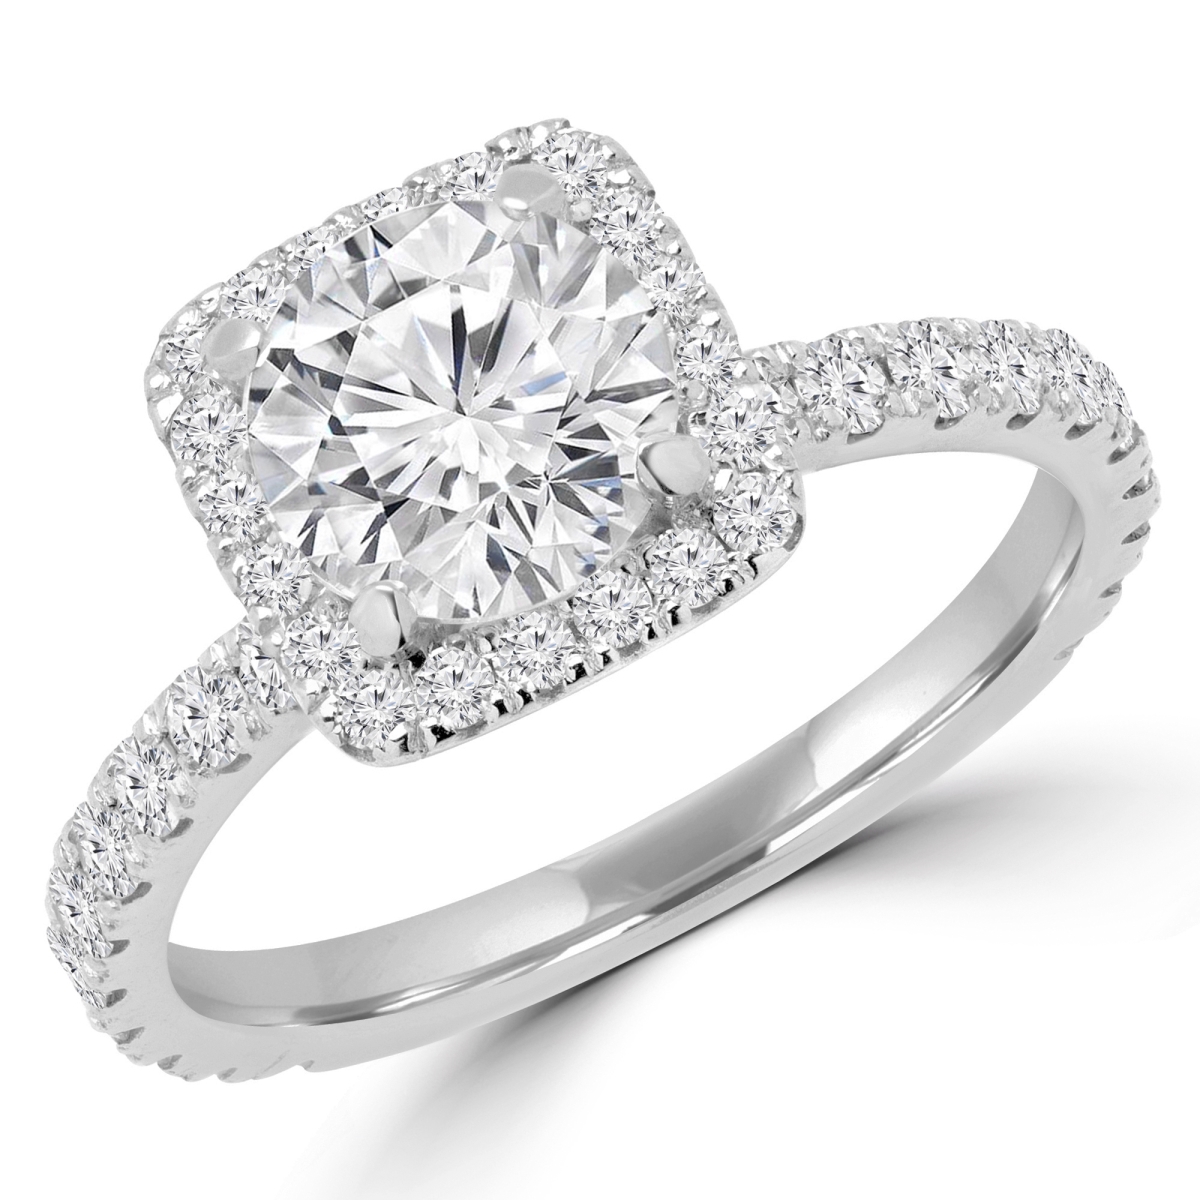 Picture of Majesty Diamonds MD180440-P 1.3 CTW Round Diamond Halo Engagement Ring in 14K White Gold